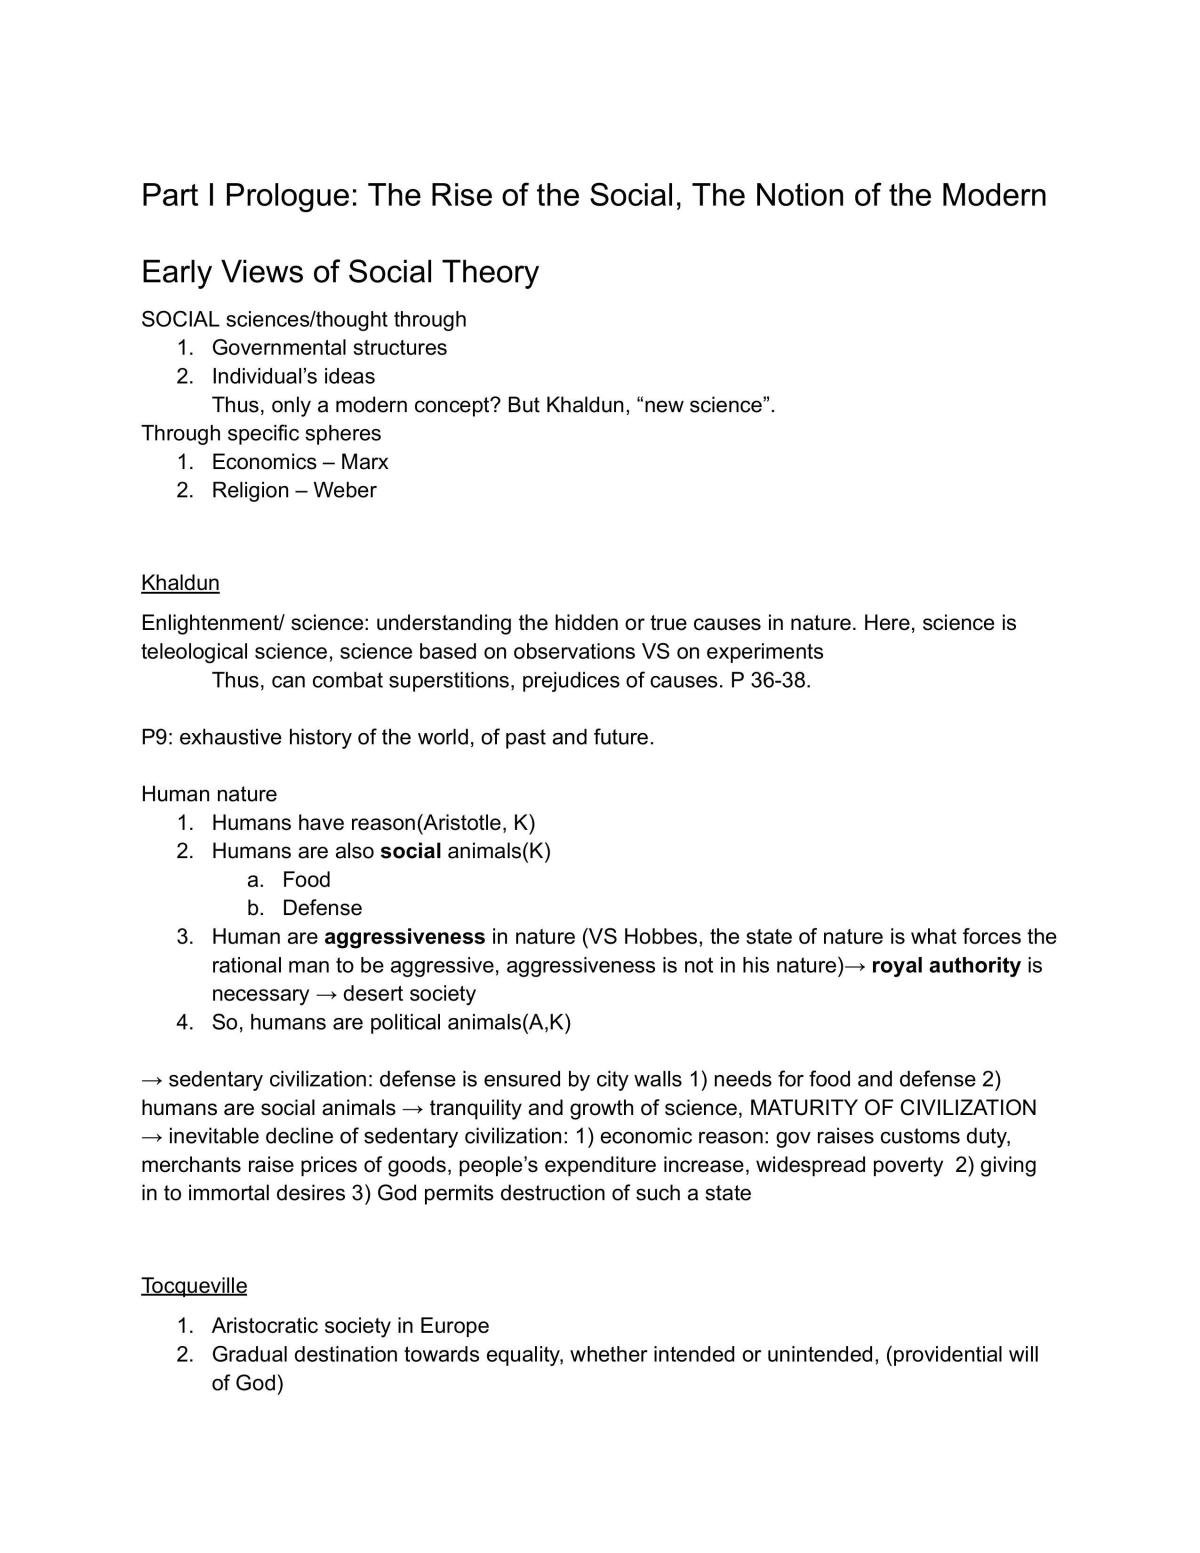 Yale-NUS College Common Curriculum course Modern Social Thought - complete study notes - Page 1